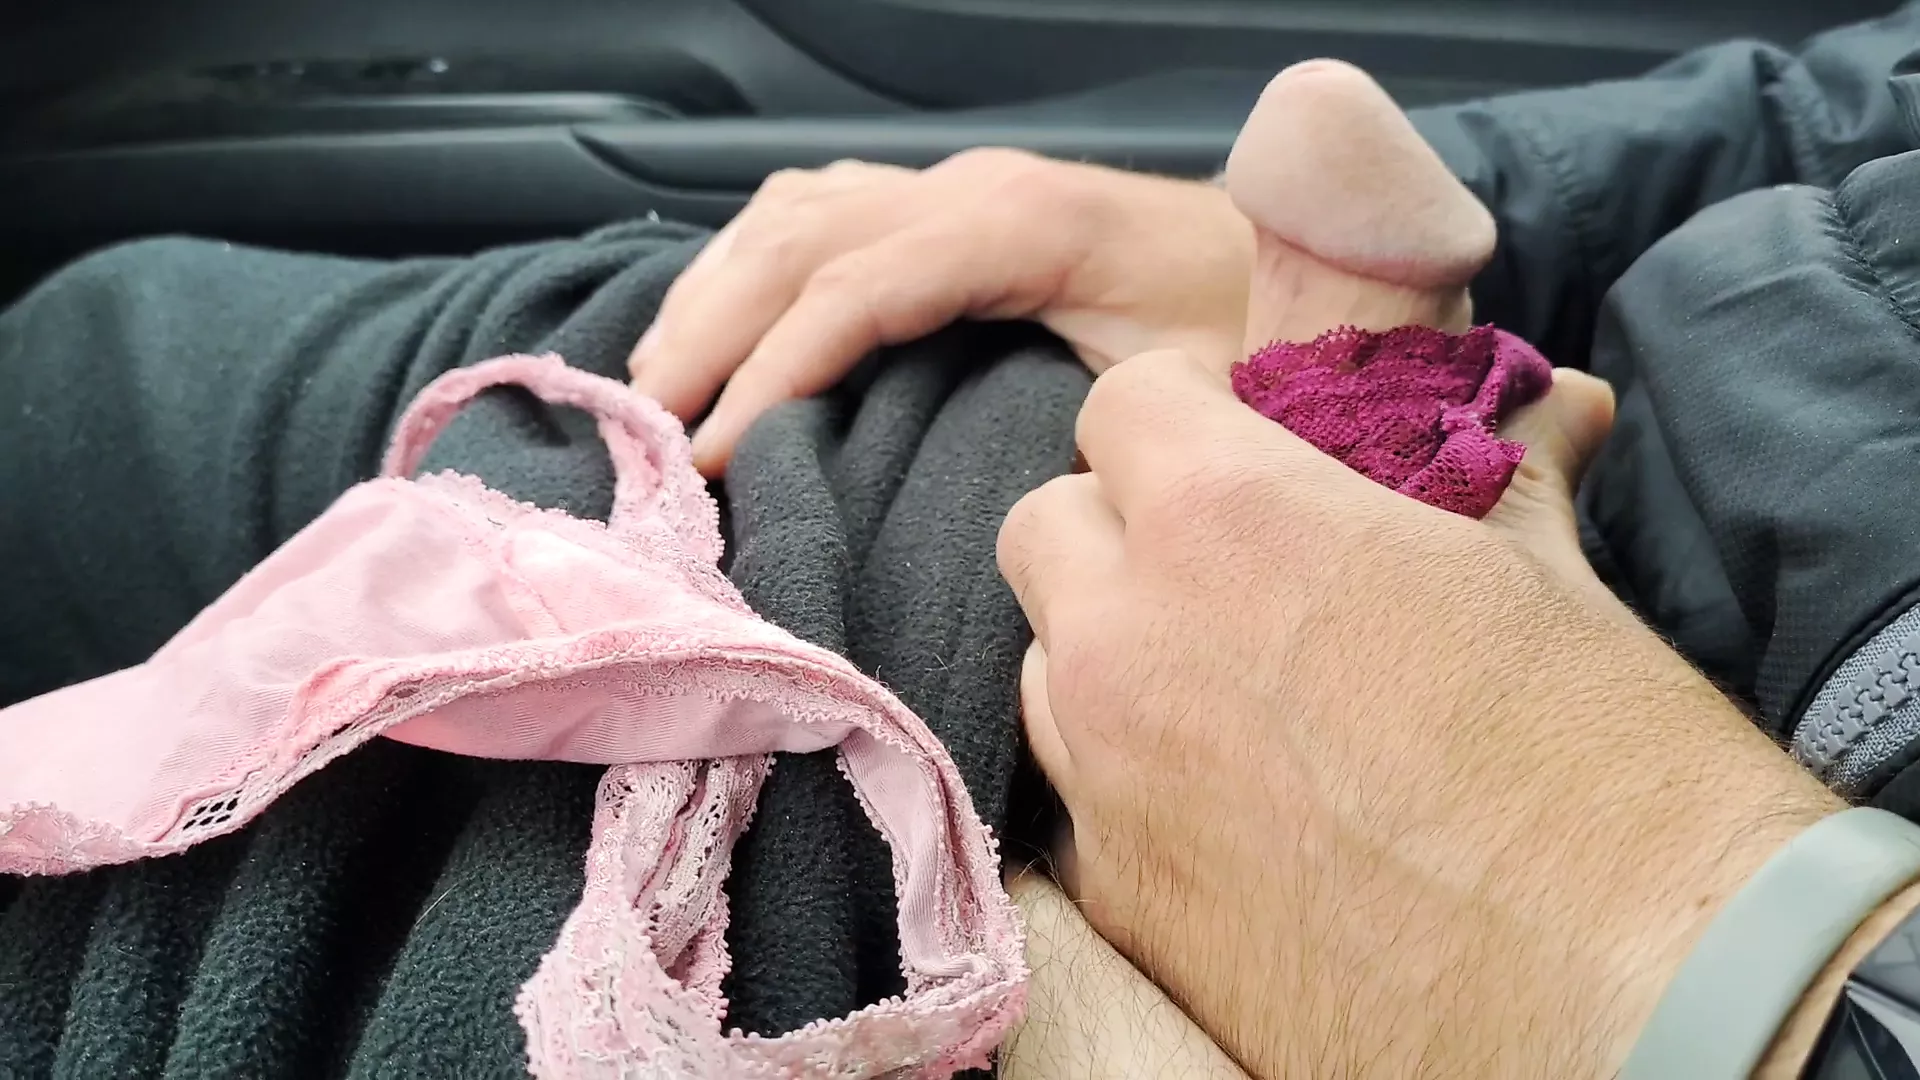 Guy uses my wifes panties to jack off and cum in car in